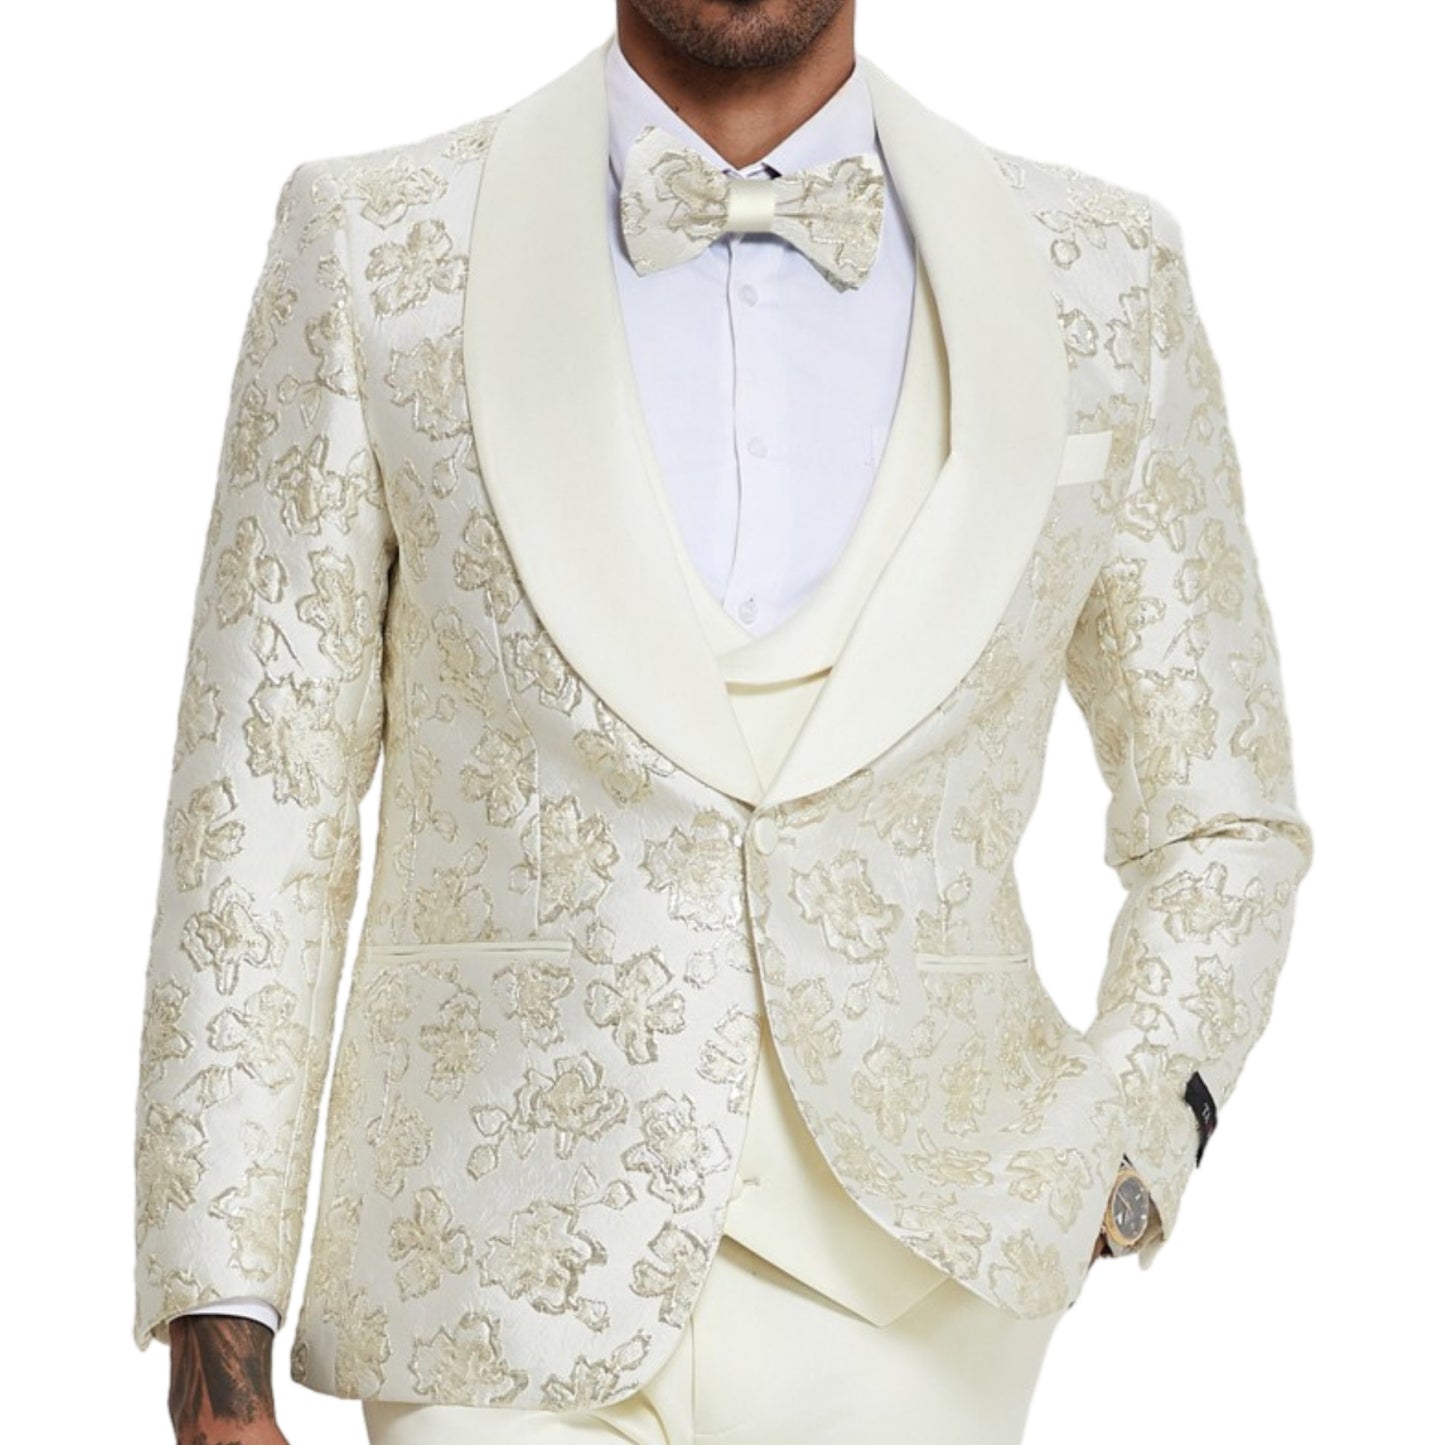 Ivory and Gold Paisley Tuxedo Full Look, Satin Ivory Pants Detail, Ivory Satin Shawl Lapels on Jacket, Elegant Ivory Vest with Satin Lapels, Detailed Ivory Buttons, Slim Fit High-End Suit, Ivory Gold Paisley Bowtie Match.